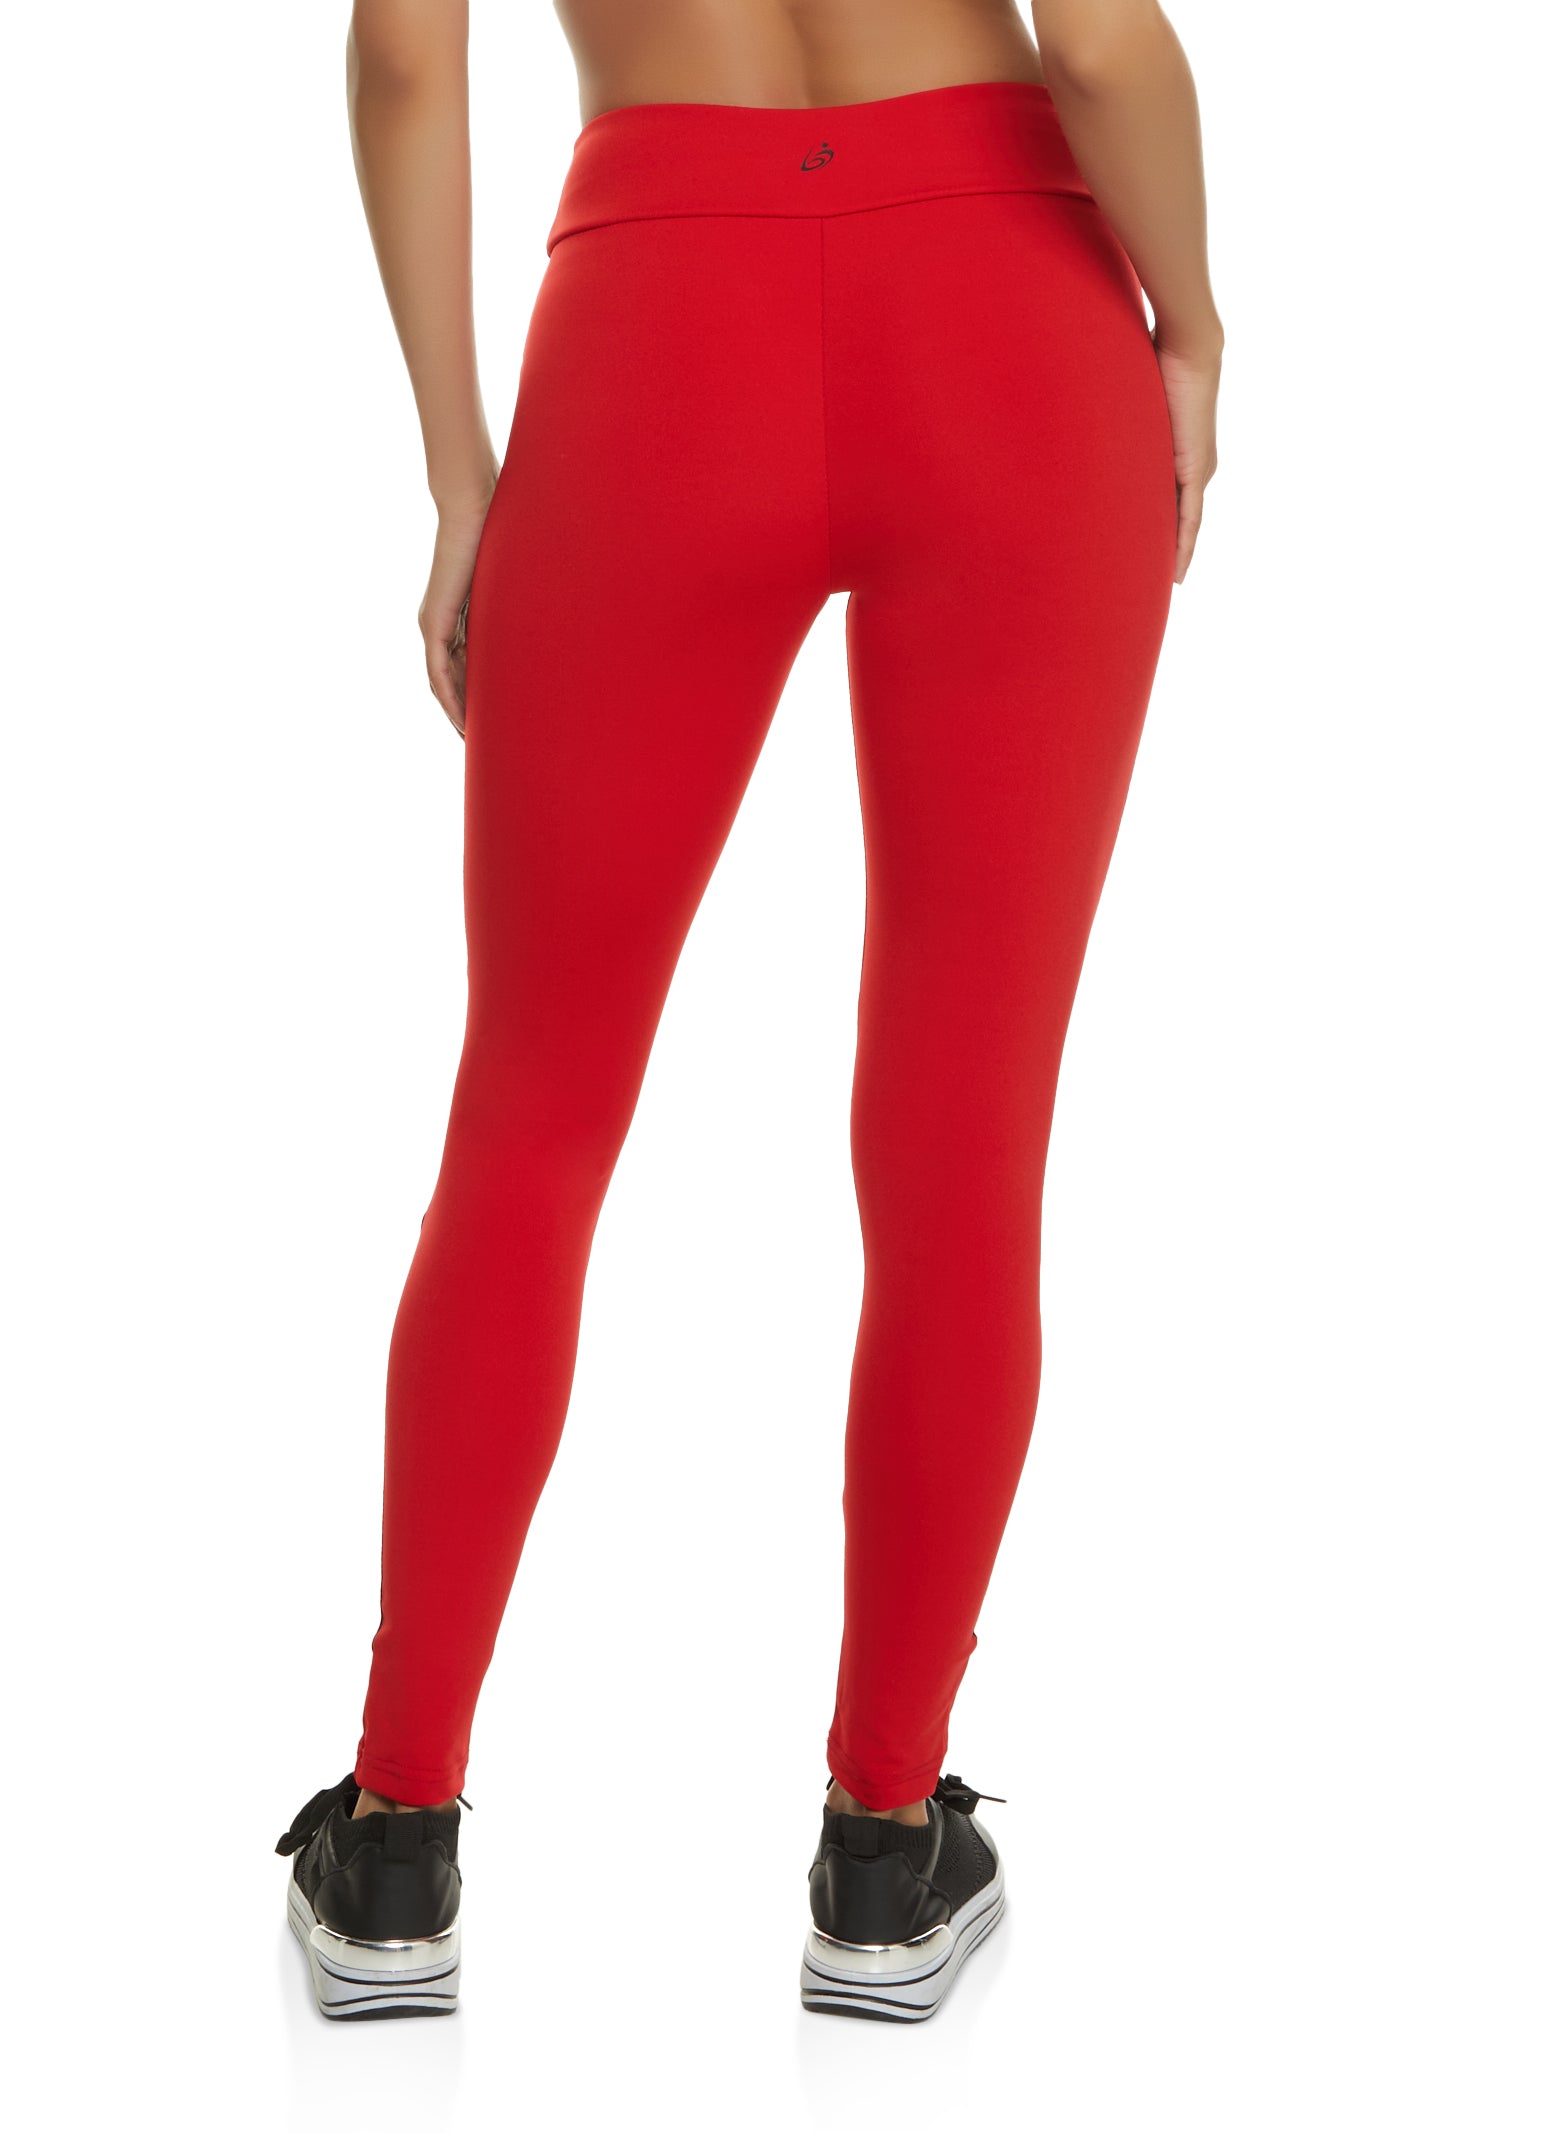 Red High Waist Seamless Gym Leggings | Gym clothes women, Cute workout  outfits, Red leggings outfit